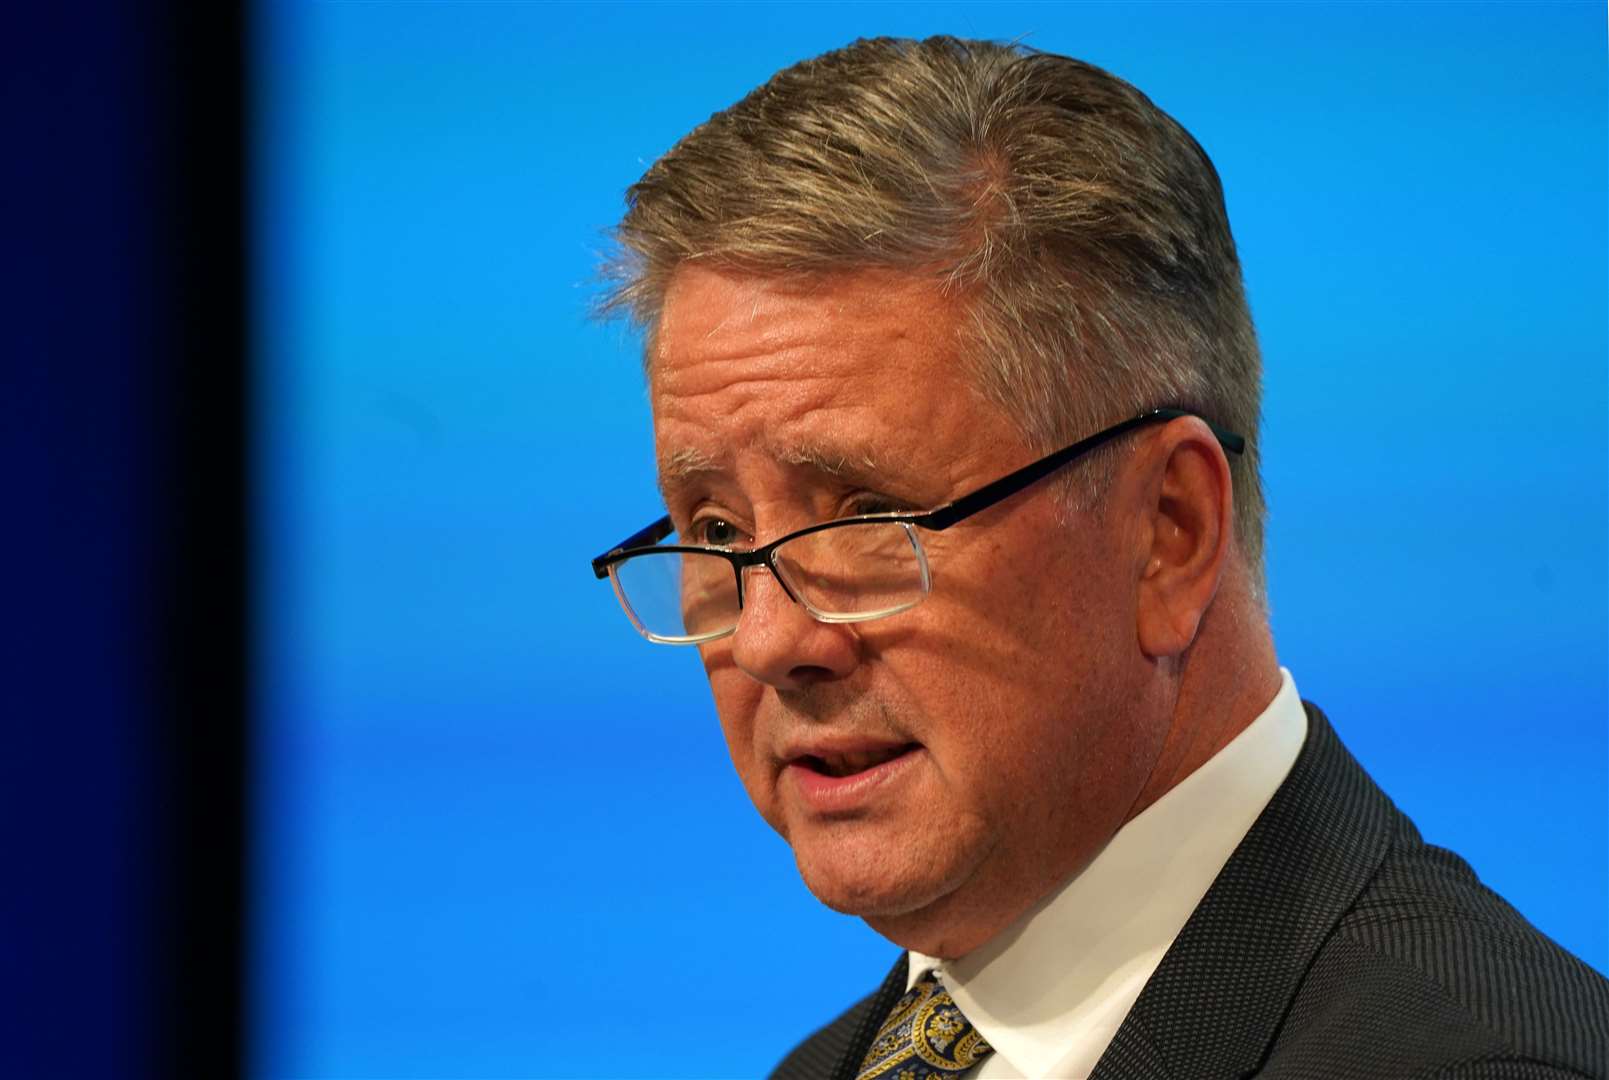 The SNP depute leader called for Mr Kerr to be dropped as a Tory candidate for Westminster (Andrew Milligan/PA)